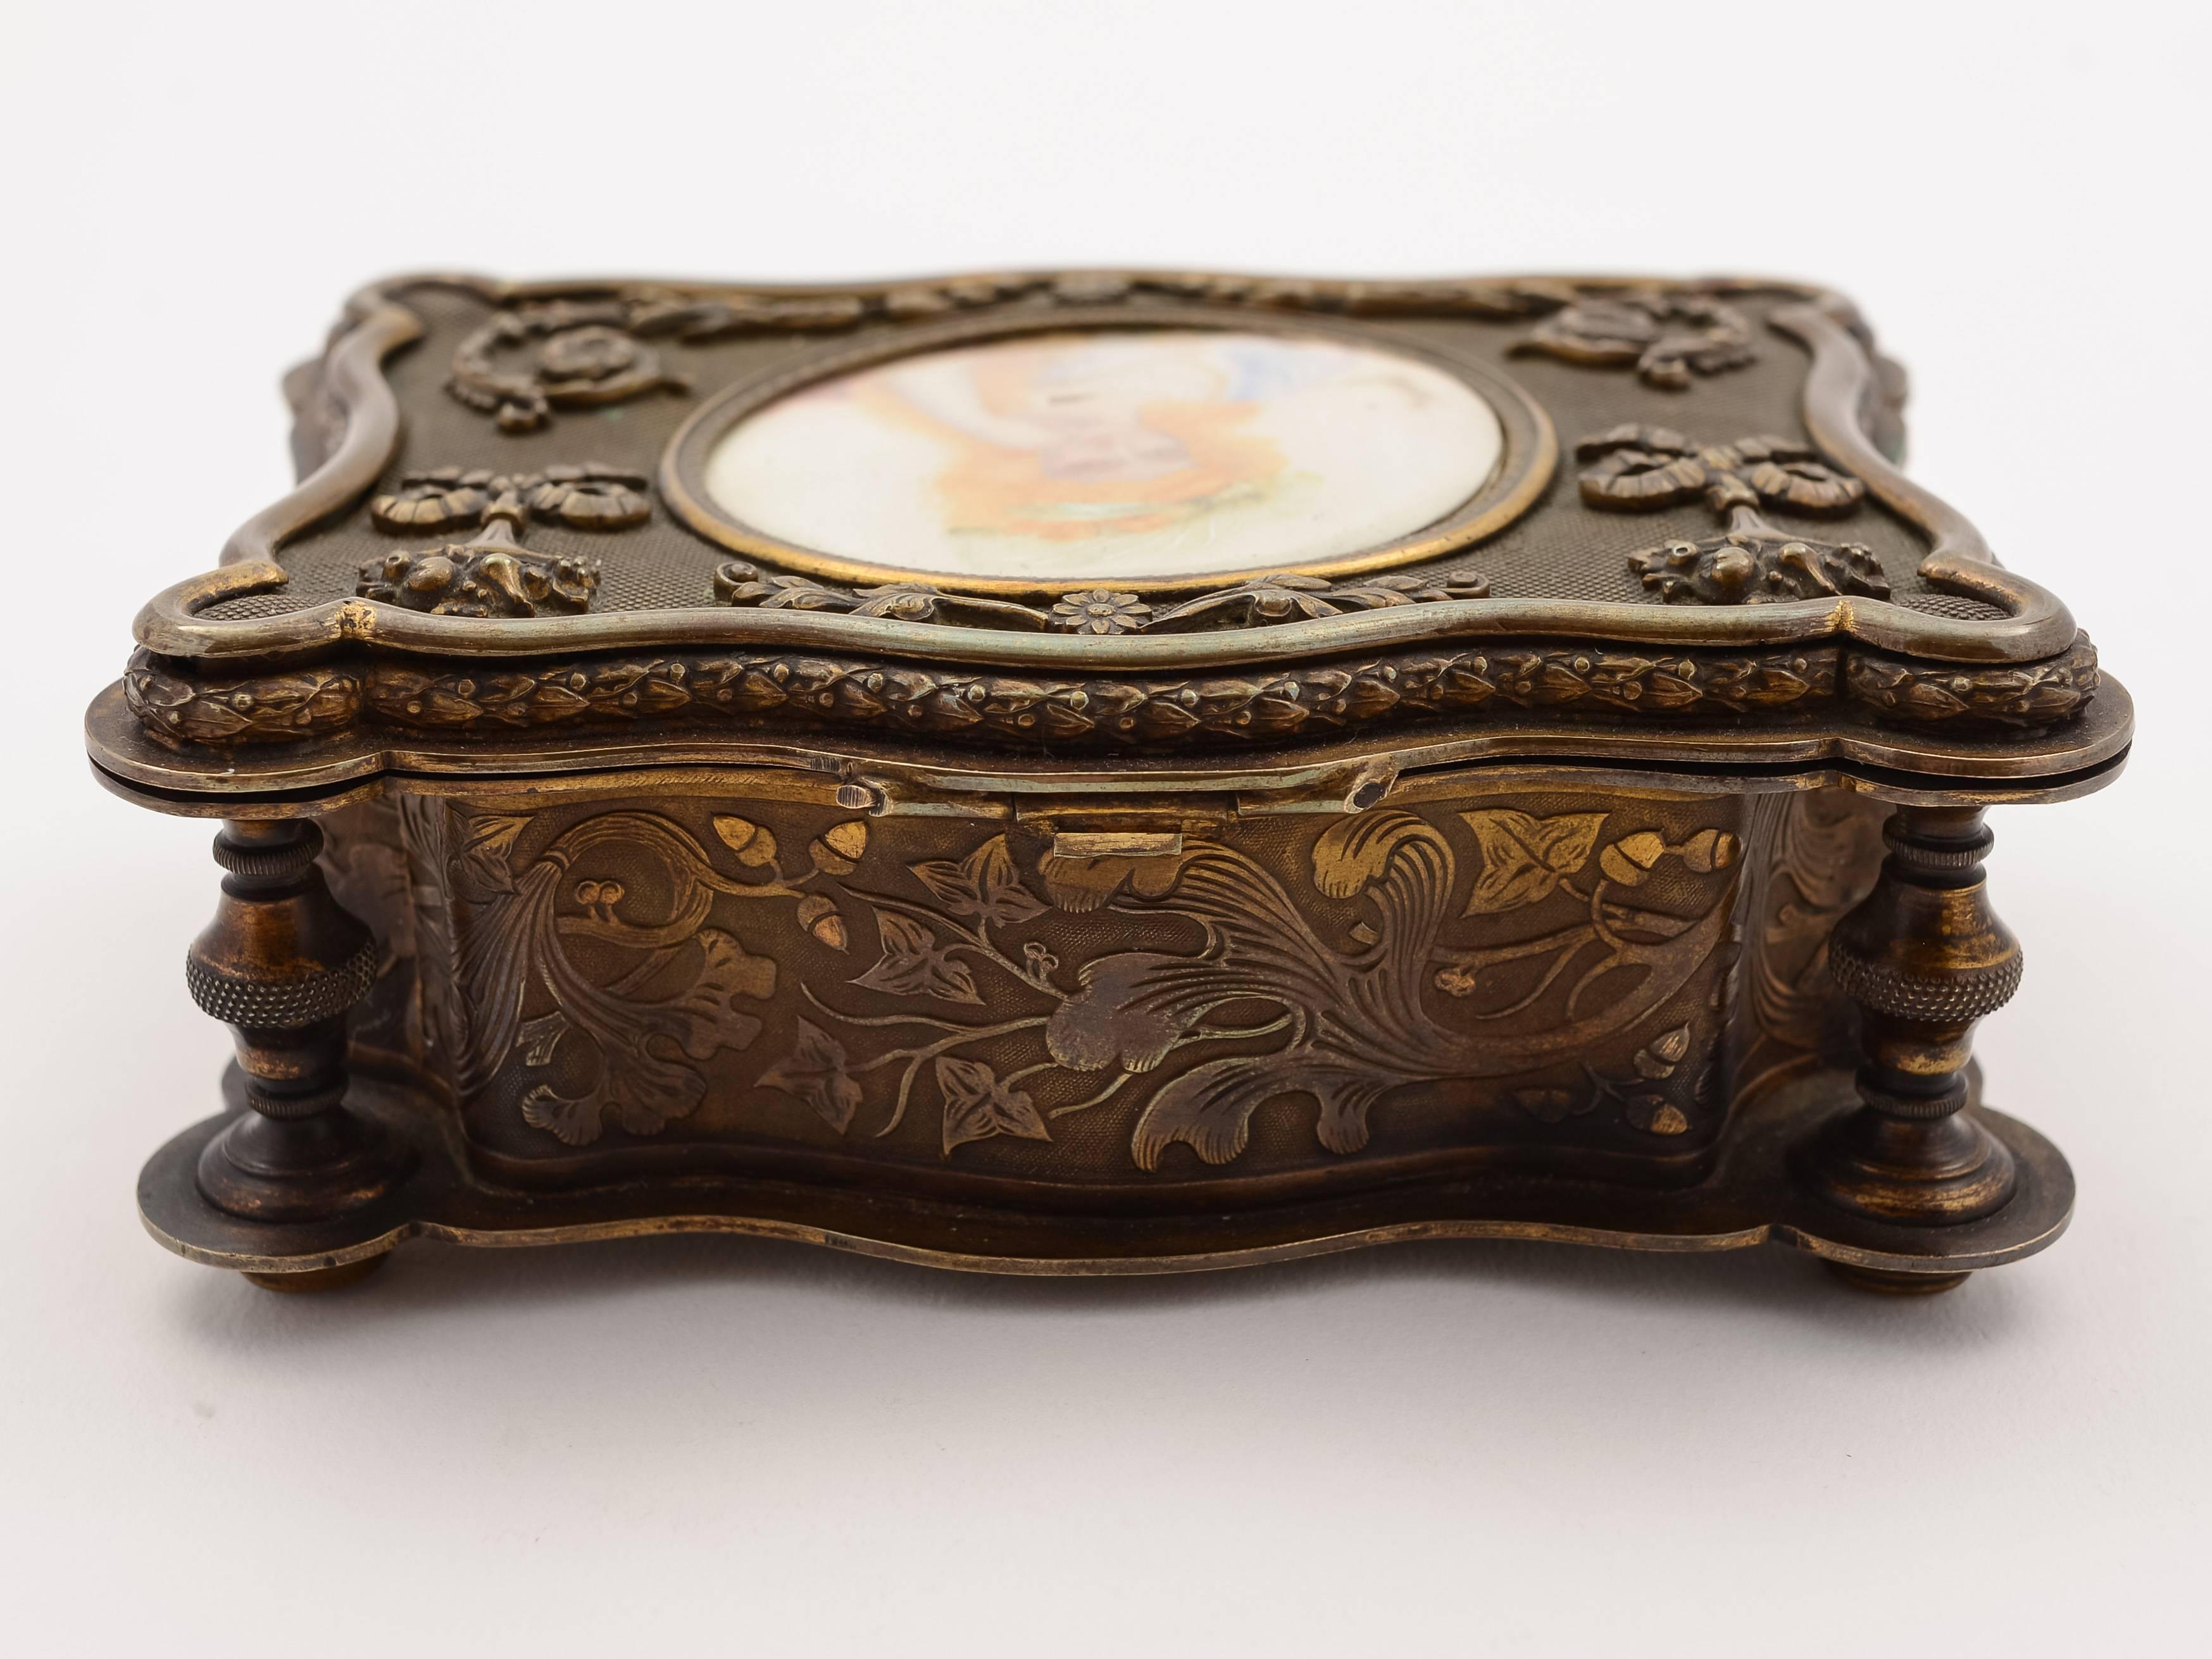 A pretty French brass jewelry casket with embossed decoration and central round painting of lady in early 19th century costume under glass. The picture is signed 'Devval' and the box has original blue velvet lining, circa 1880.

Measure: Total